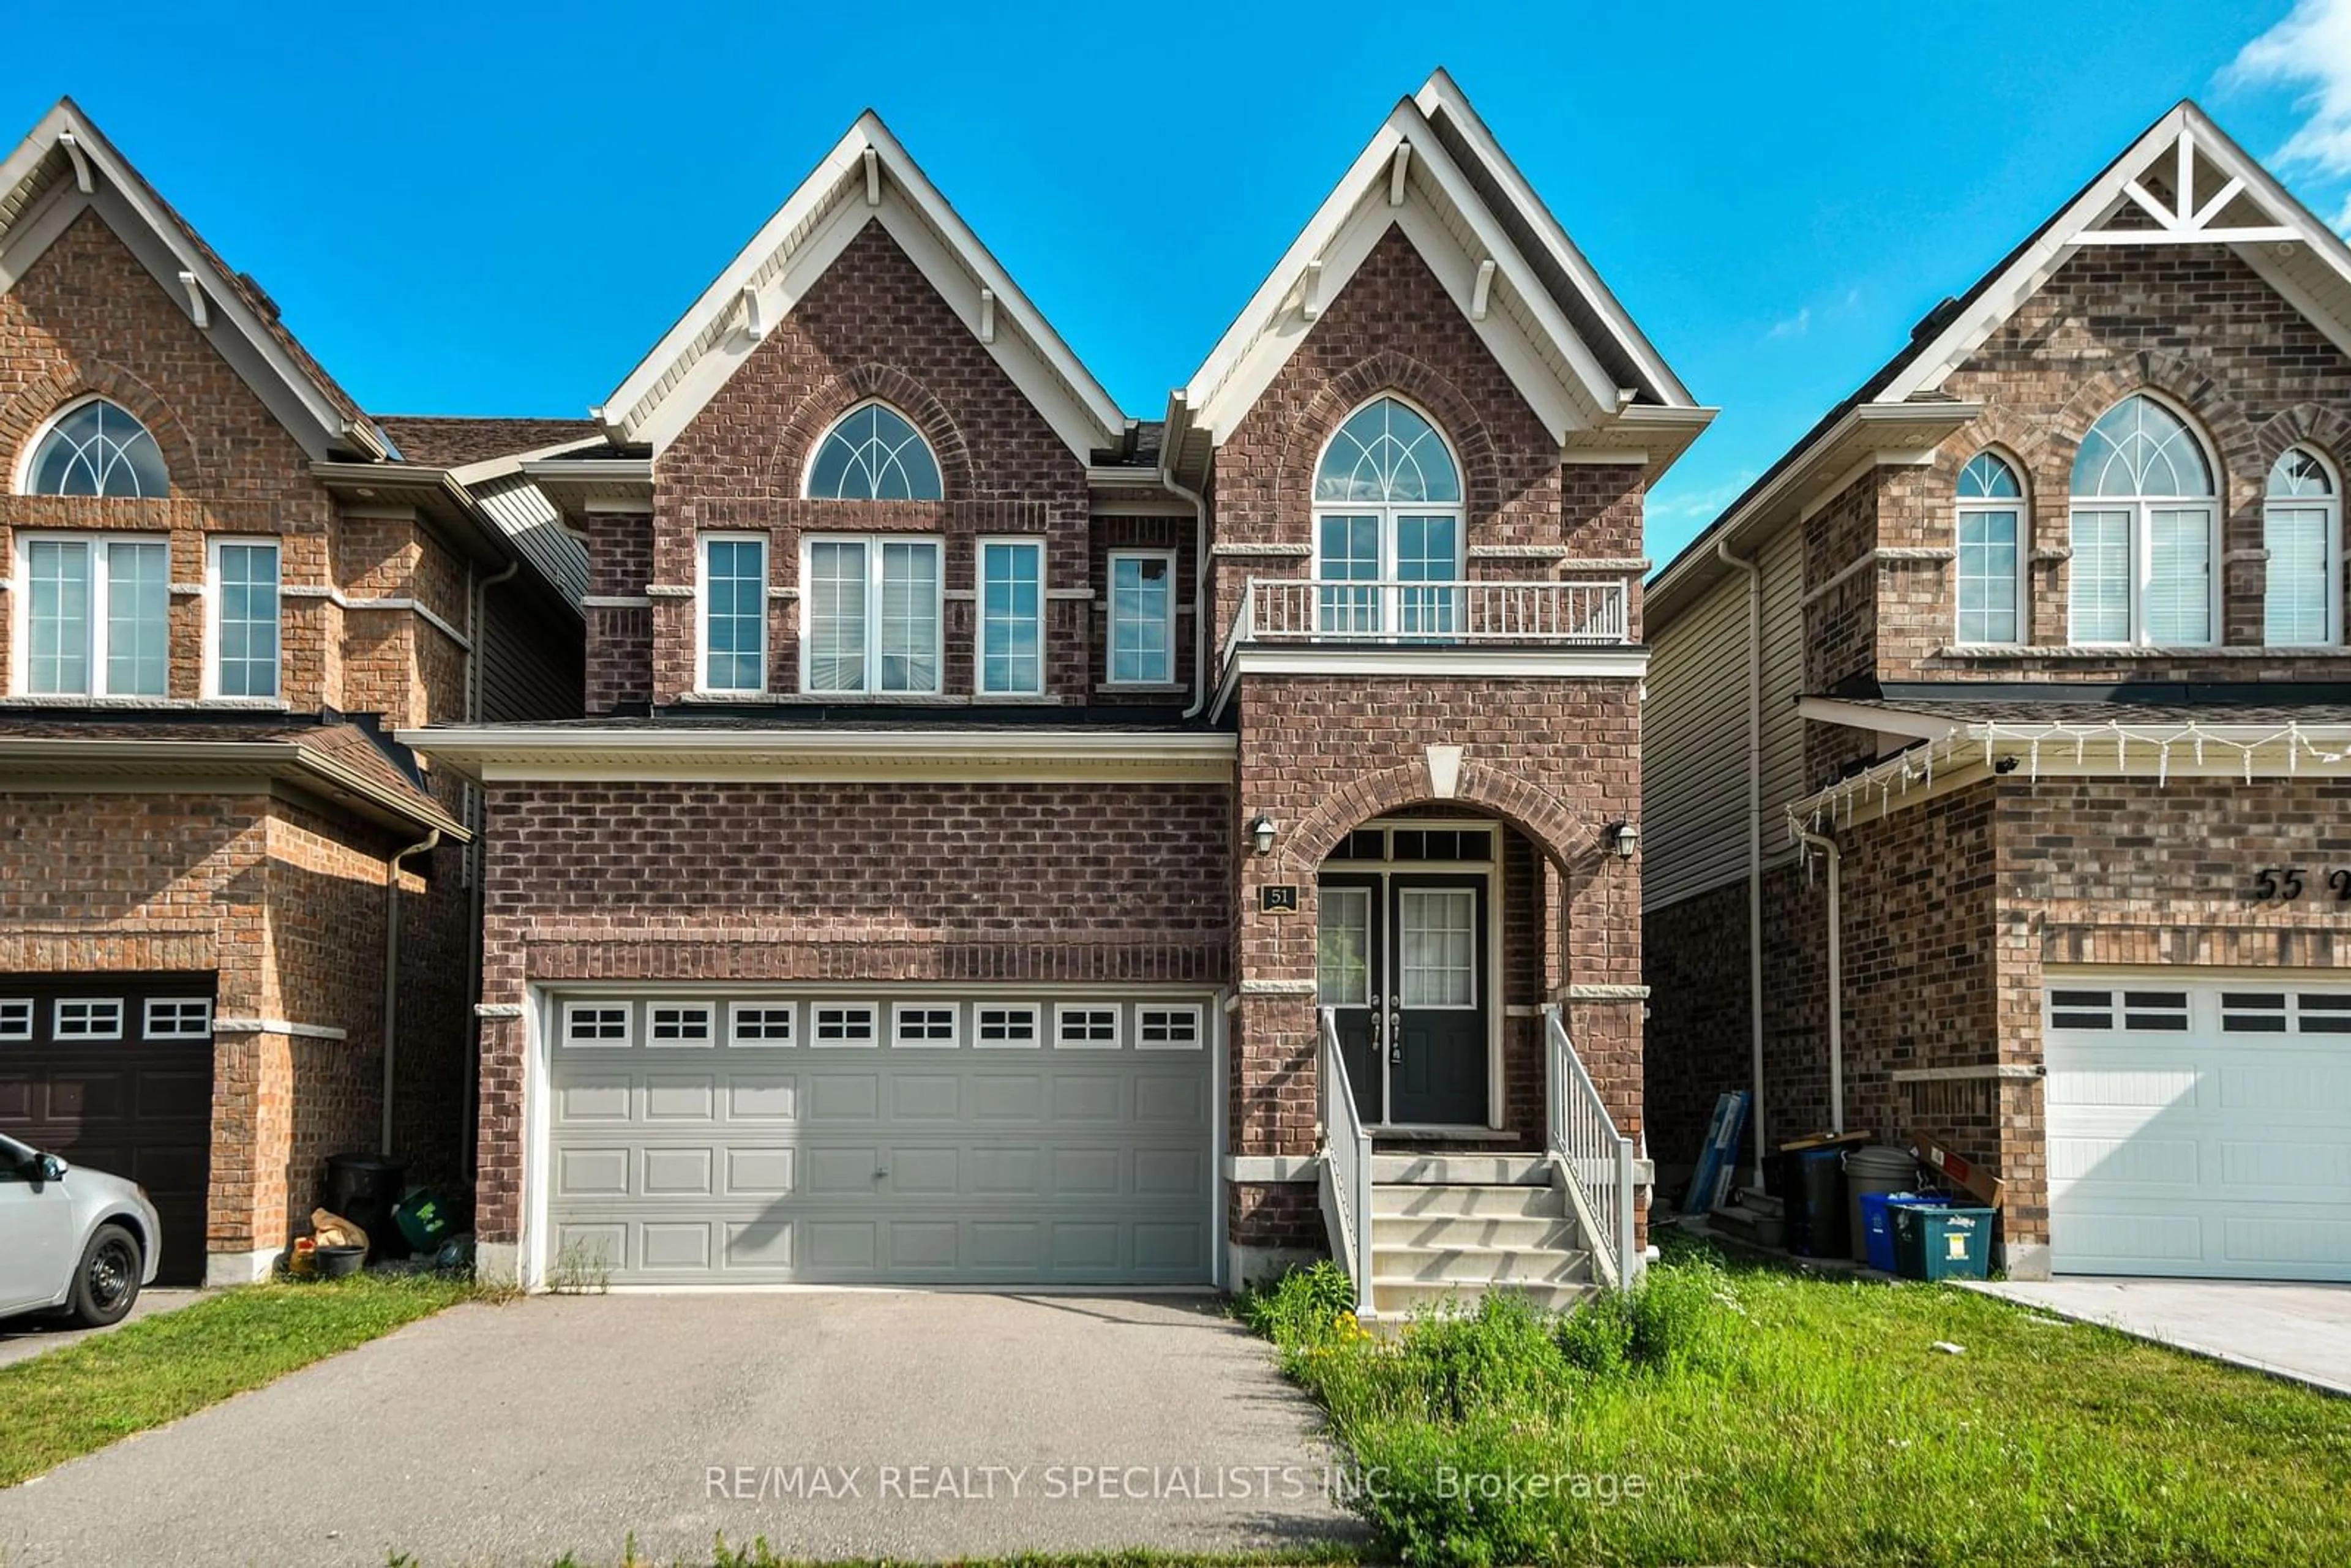 Home with brick exterior material for 51 Weatherall Ave, Cambridge Ontario N3H 0C1